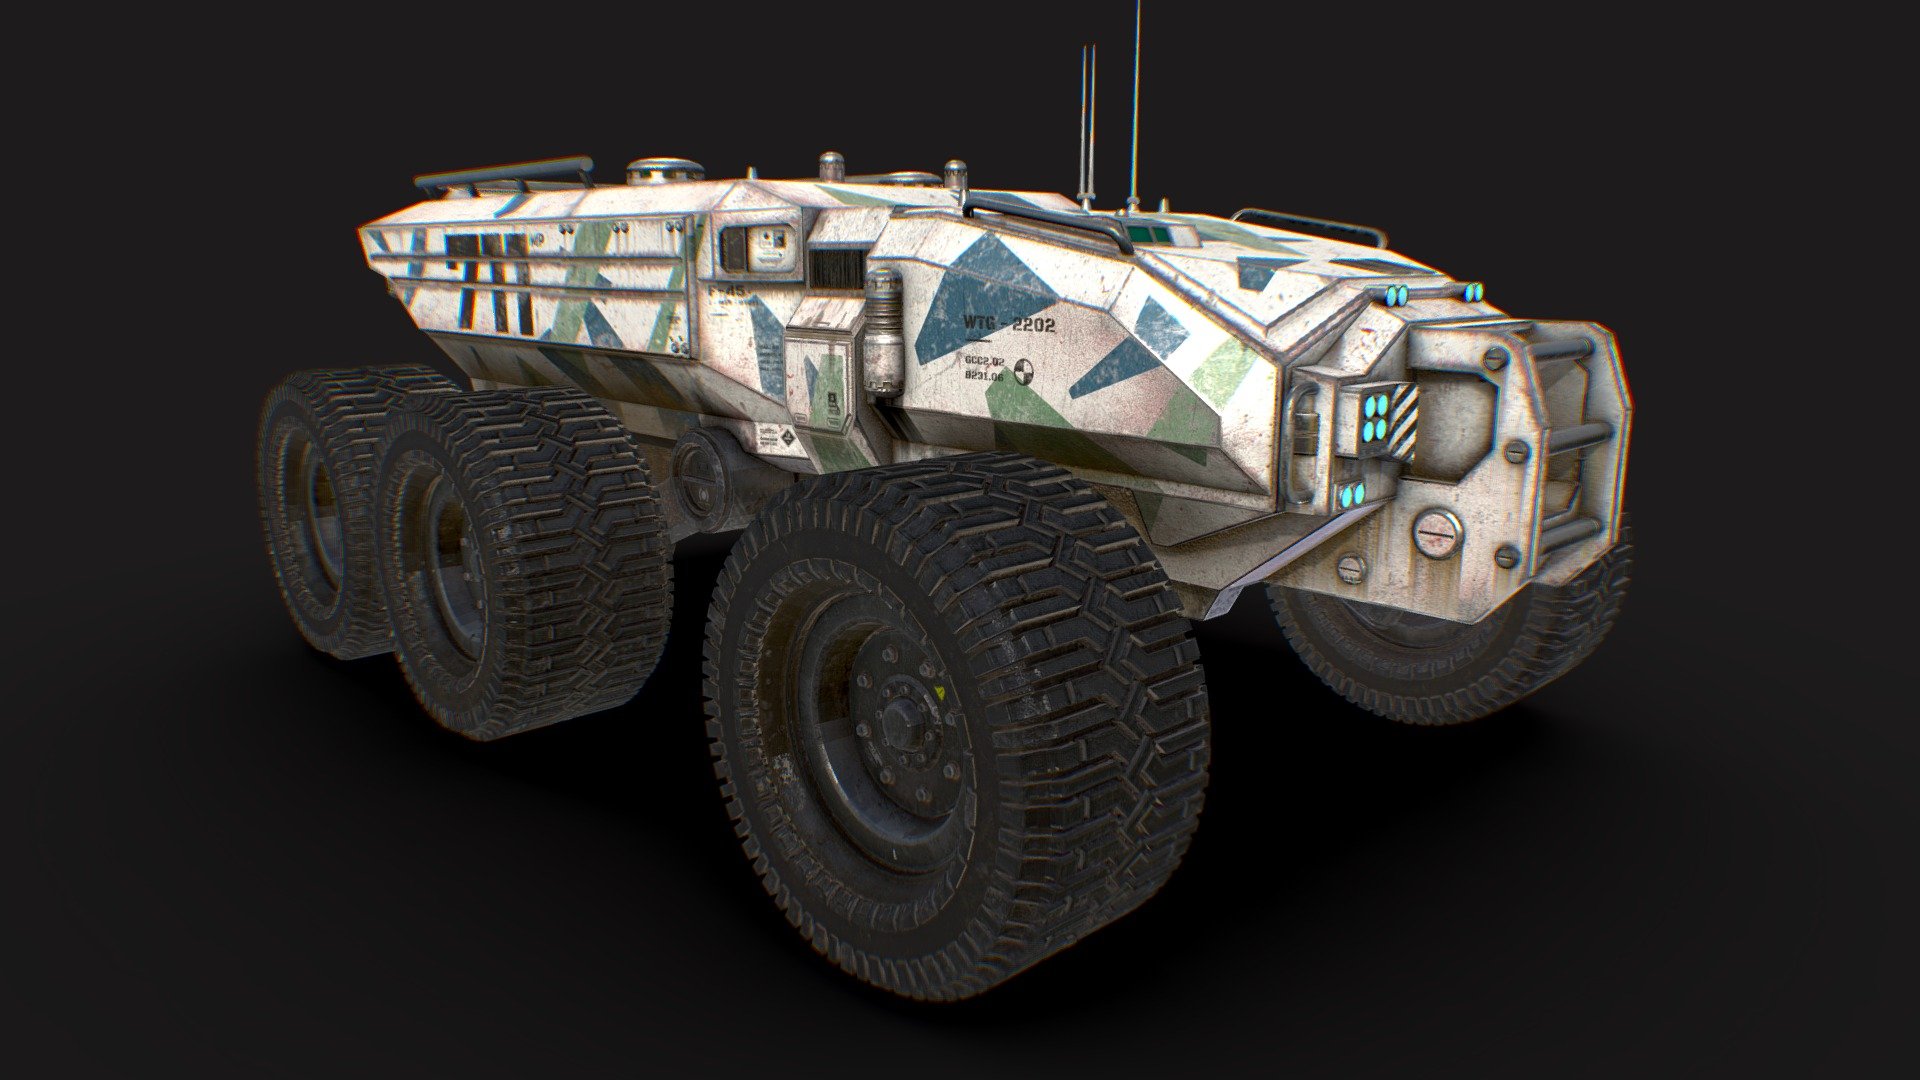 Full .uproject Working

Technical vehicle, Transporter, Rover Mars, Space, Rover, 3D, Model machine technology rover mars nasa car vehicle industry astronomy space science saturn spacecraft machinery power robot other

DESCRIPTIO​N:


UE4 and UE5 Project
This model is provided as obj, fbx and SPP format.
Different versions of 3ds max scenes are provided. SubstancePainter - file provided. (
TEXTURES EXPORT FOR ANY ENGINE!)
exported for any enjine! 2020.2.1(6.2.1)
Blender file provided
Unity Asset (.unitypackage) Provided! .
tbscene, .glb, .mview
Files Provided!
Provides full textures for the Vehicle
Textures in the resolution of 4096x4096. Enjoy using! :)
Full U4 Project .uproject Provided


Or get this model here: https://www.artstation.com/a/93366 - Technical Vehicle White Unreal Engine - Buy Royalty Free 3D model by sergey.koznov 3d model